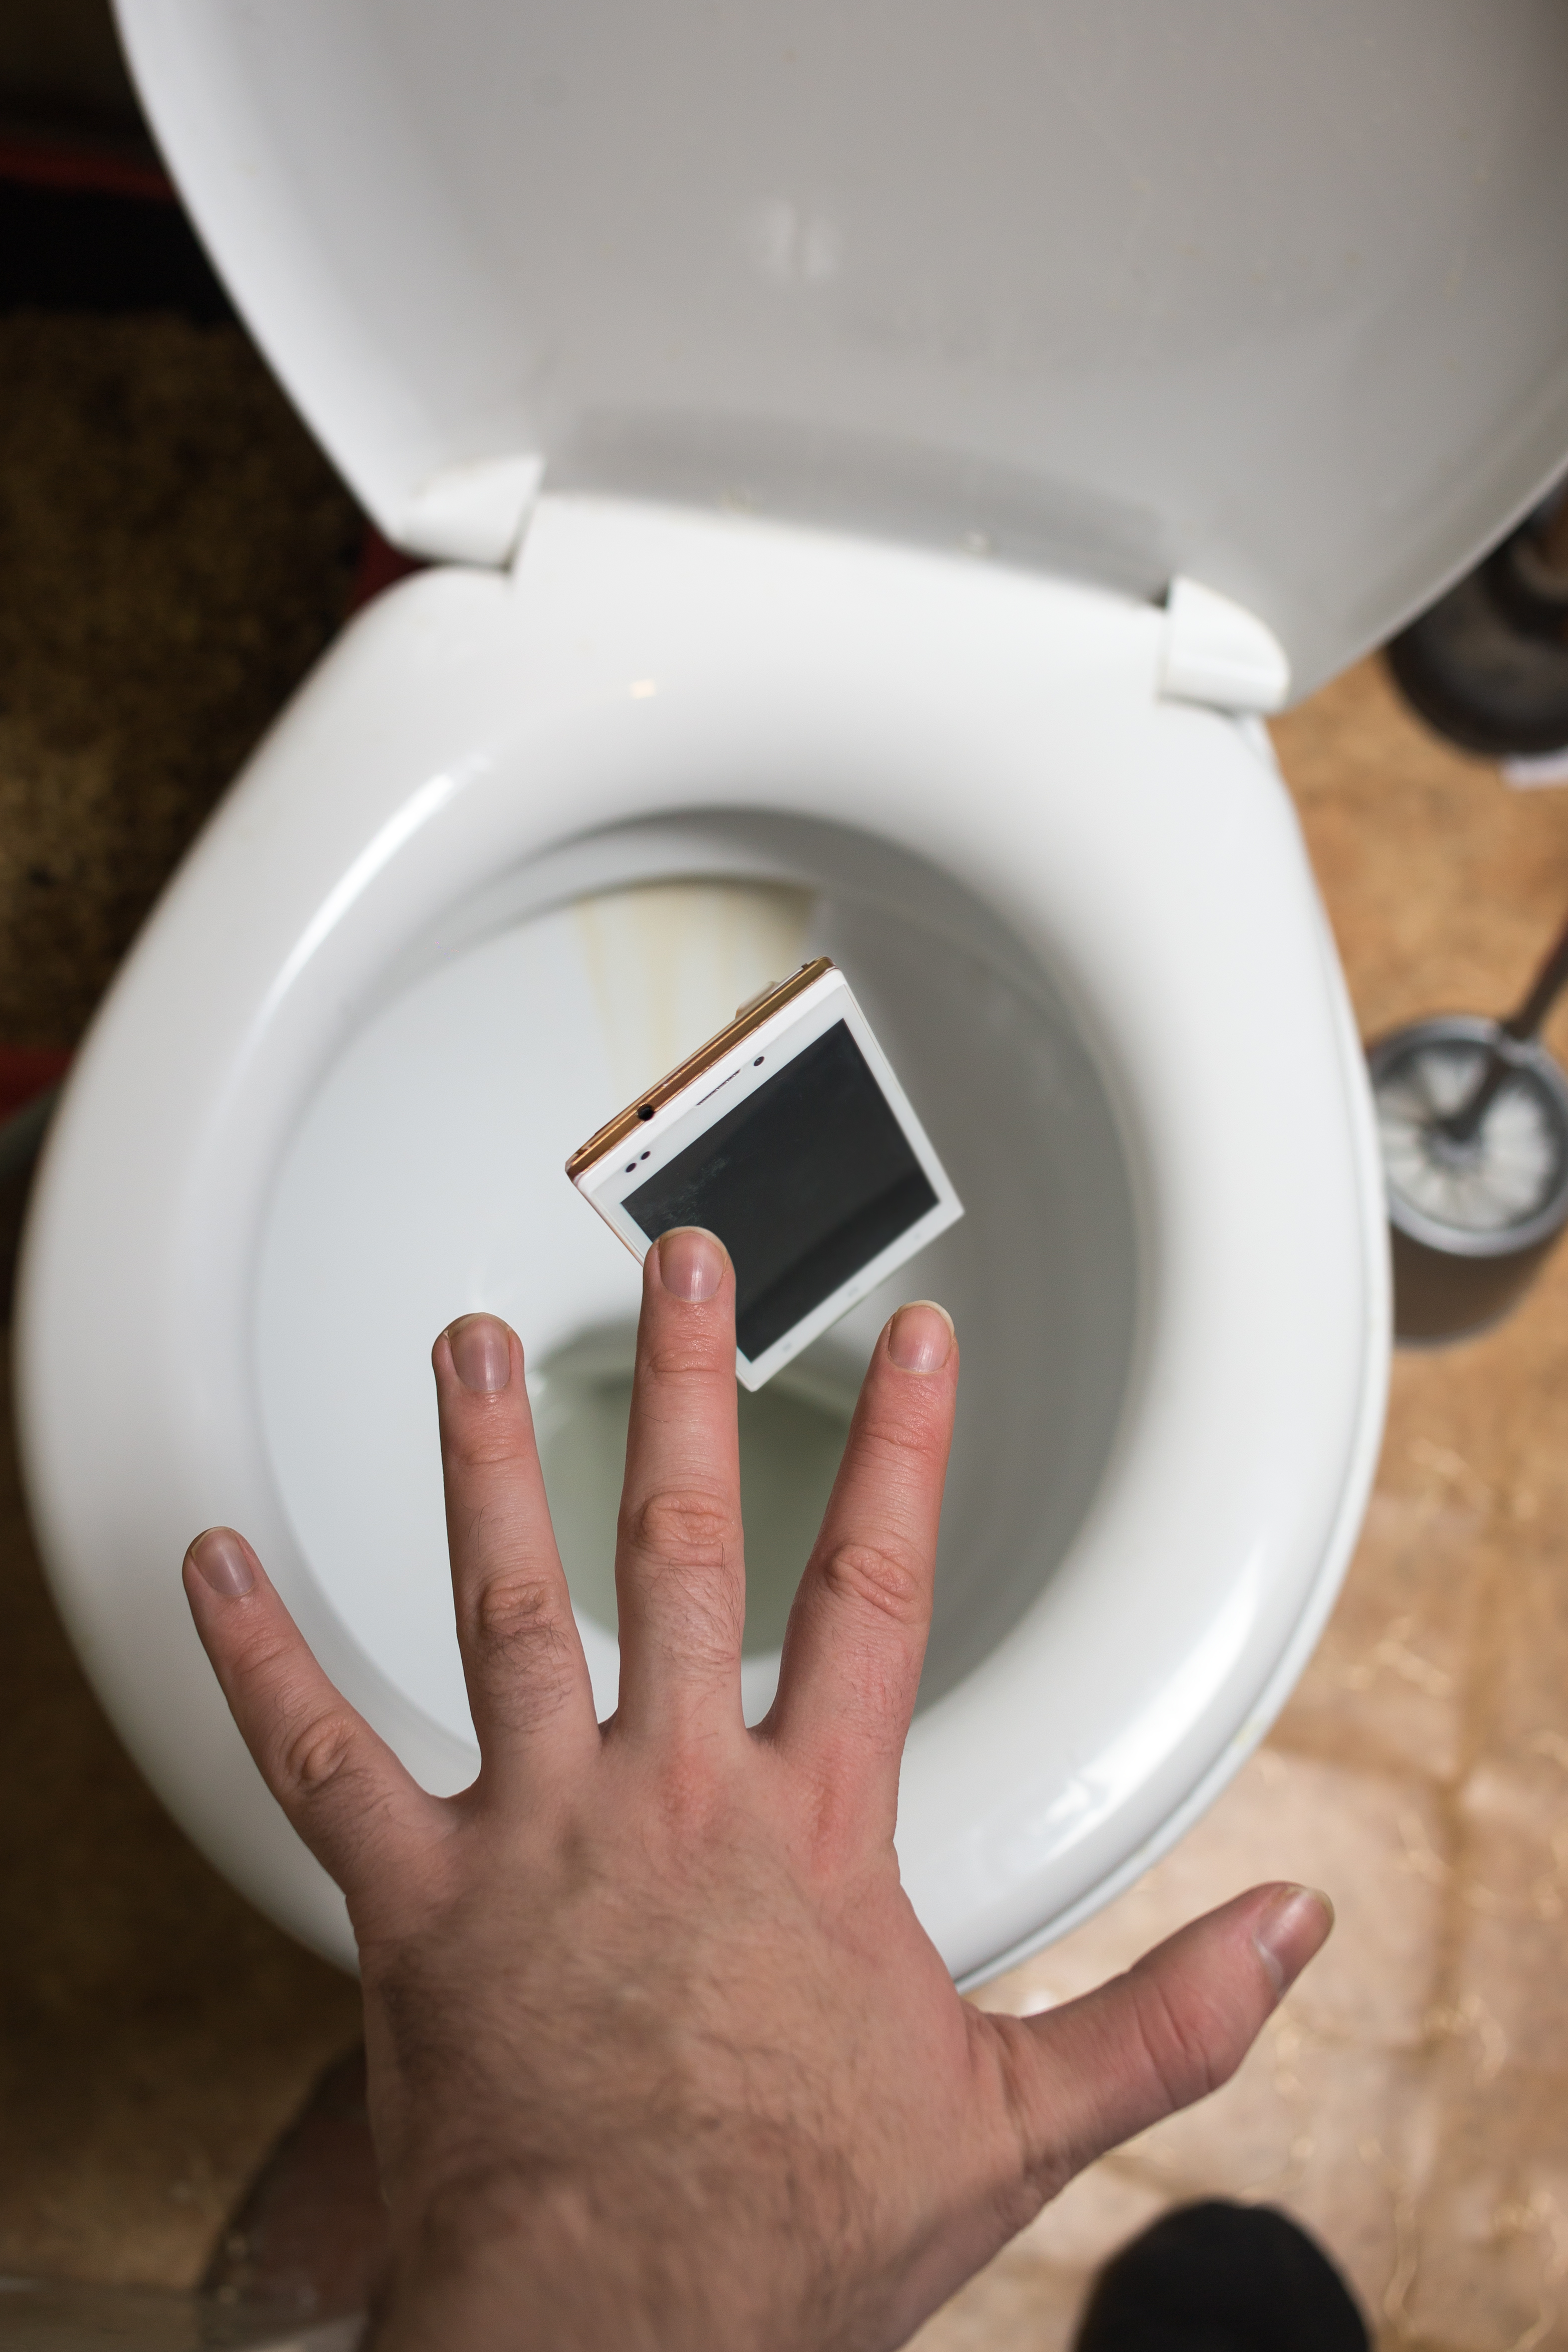 Man accidentally throws smartphone into toilet. | Source: Shutterstock